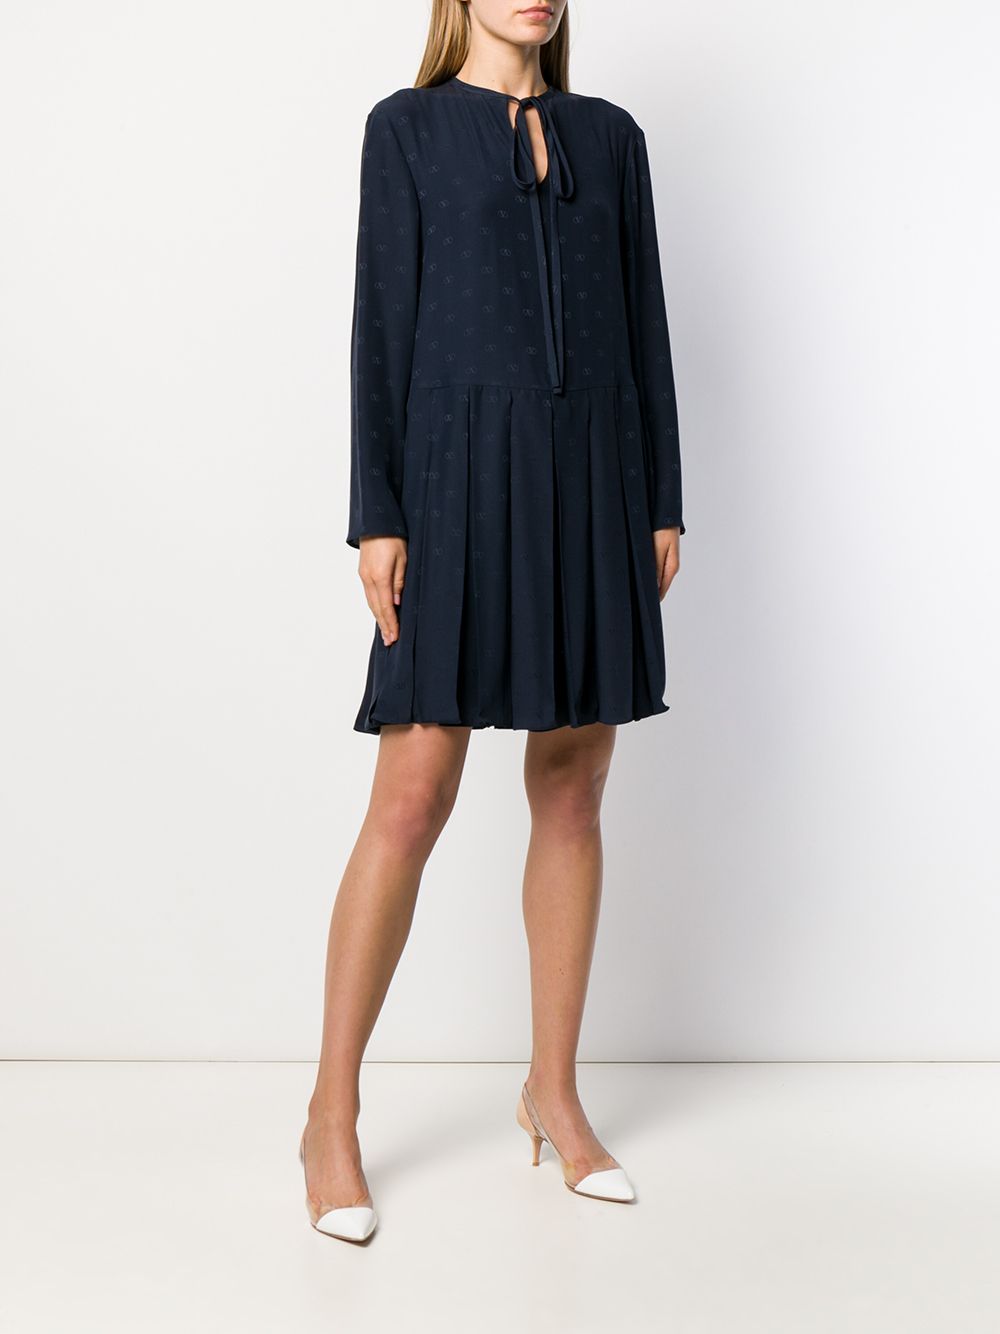 Shop blue Valentino tie-neck shift dress with Express Delivery - Farfetch